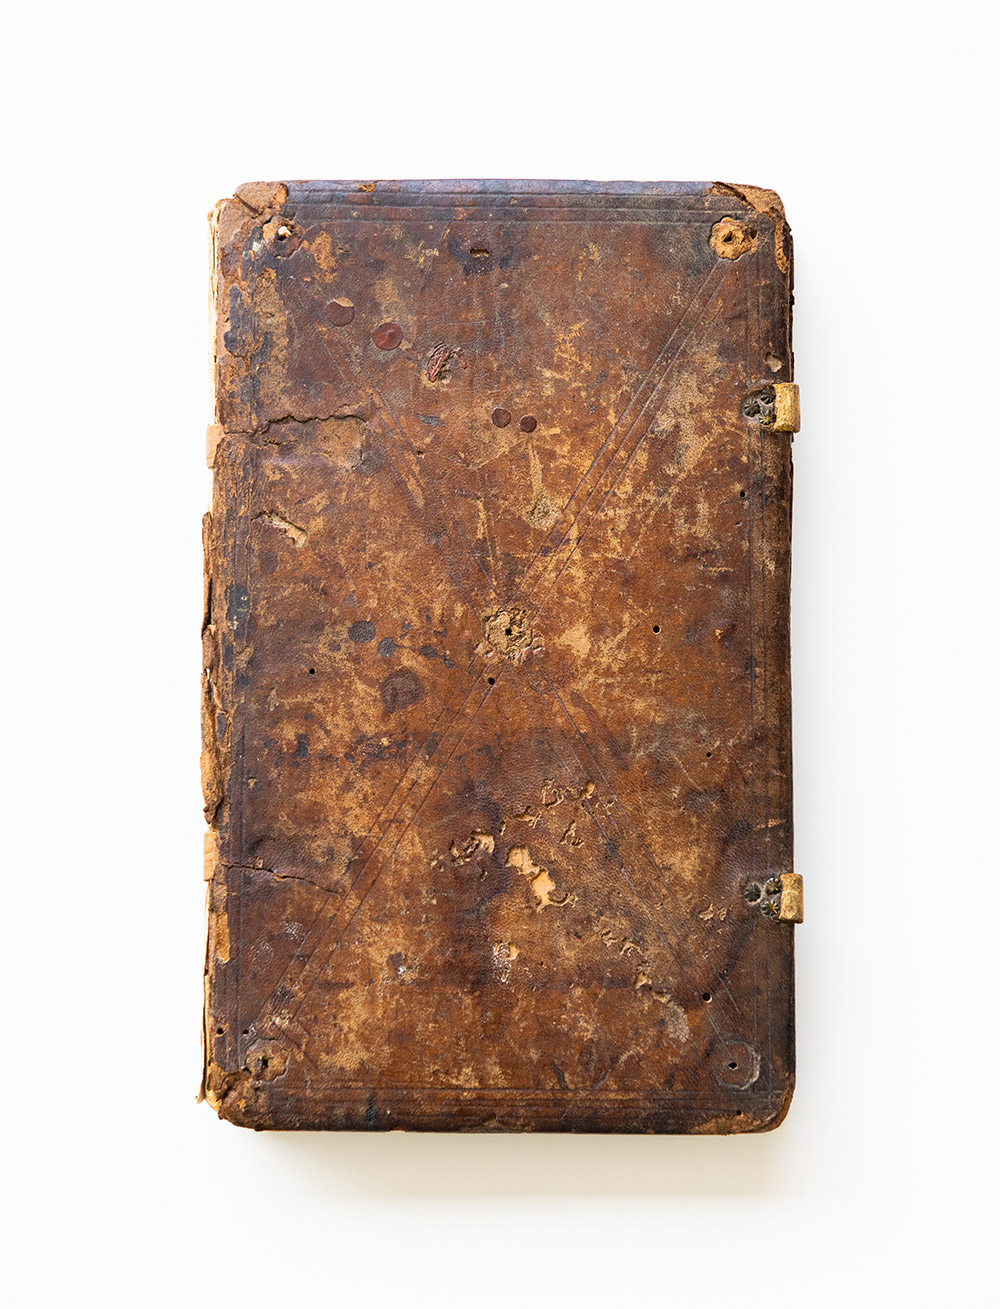 the exterior of a centuries old manuscript which is brown and weathered.